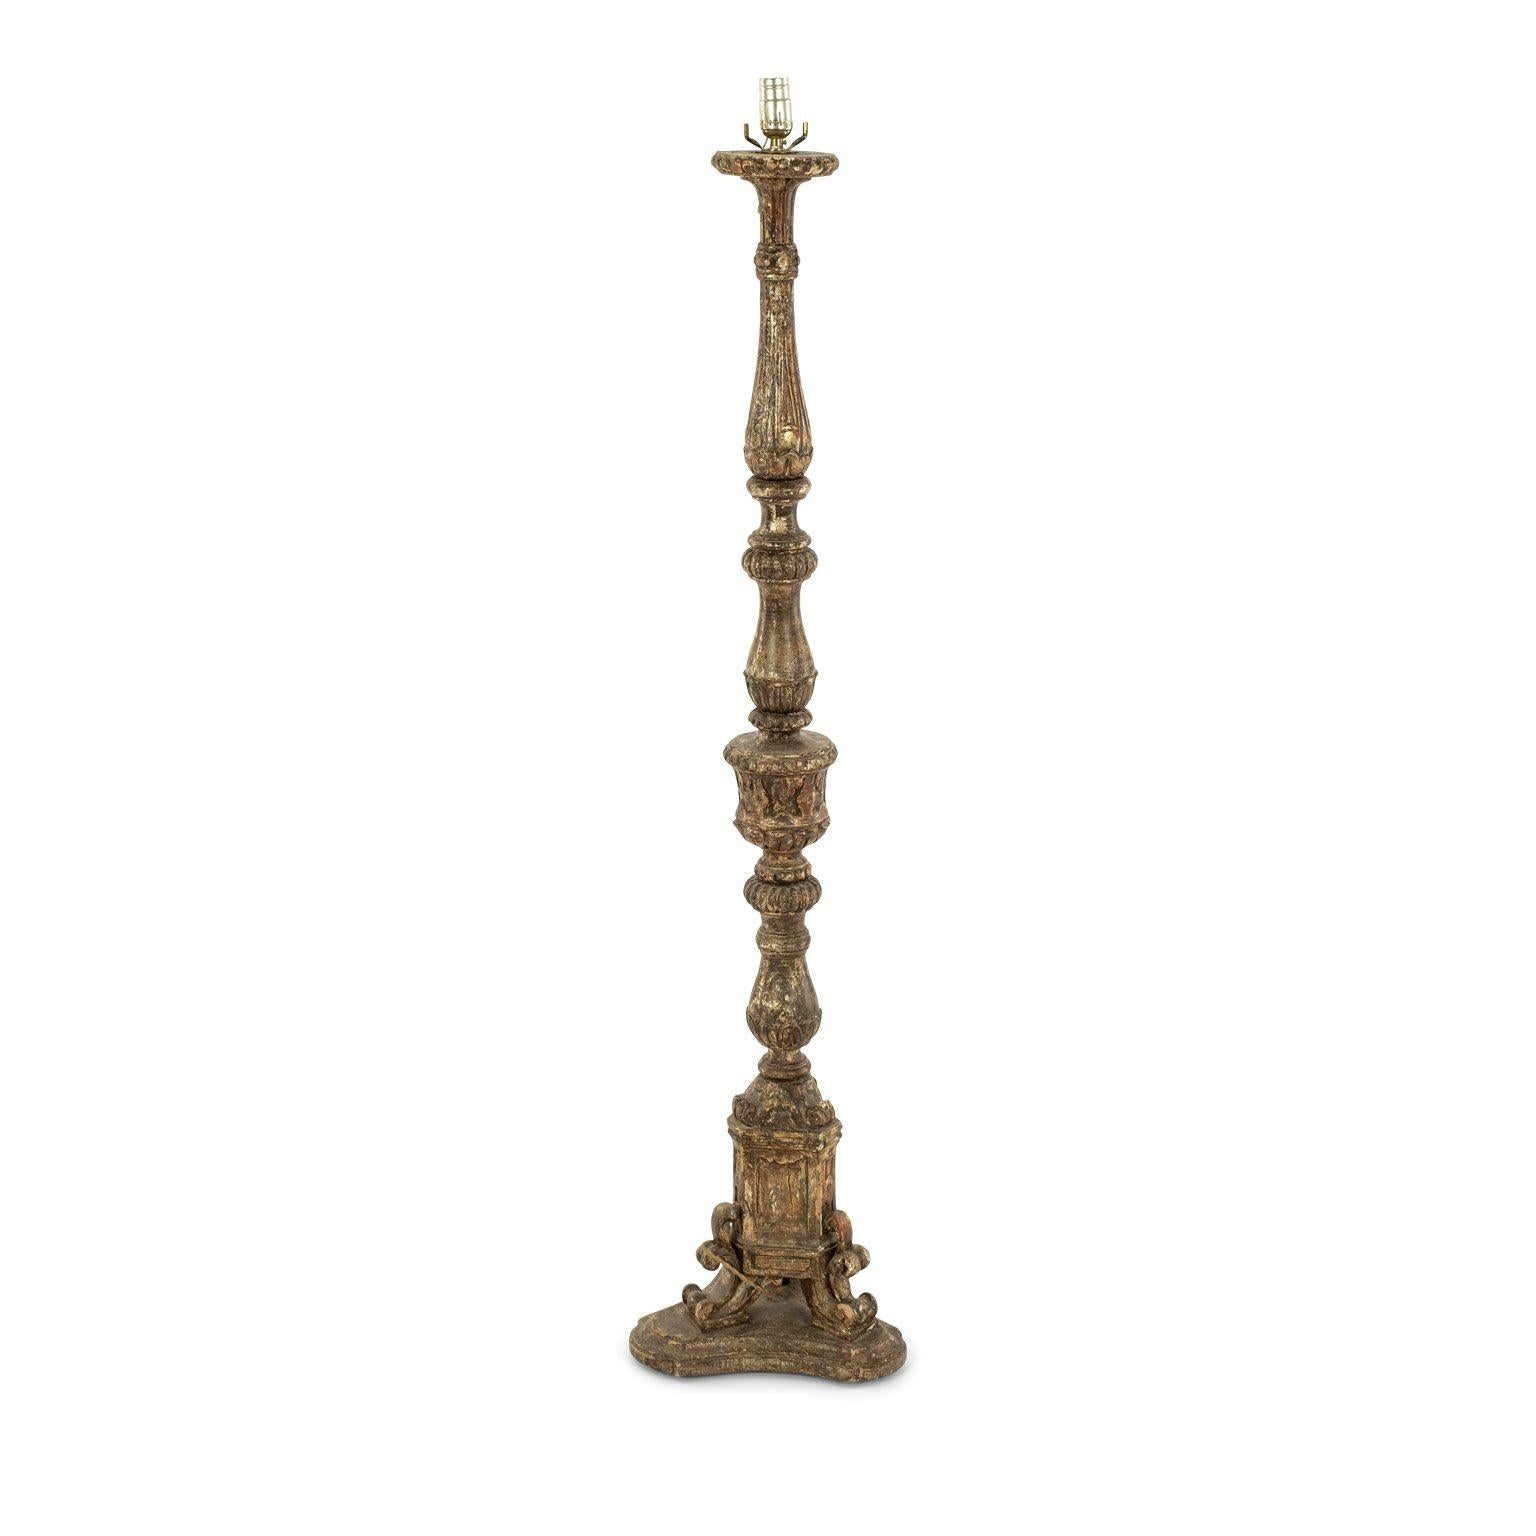 Giltwood candlestand floor lamp: Late 19th century giltwood candlestand, newly wired as floor lamp. Height measured from floor to top of socket. Does not include a shade.